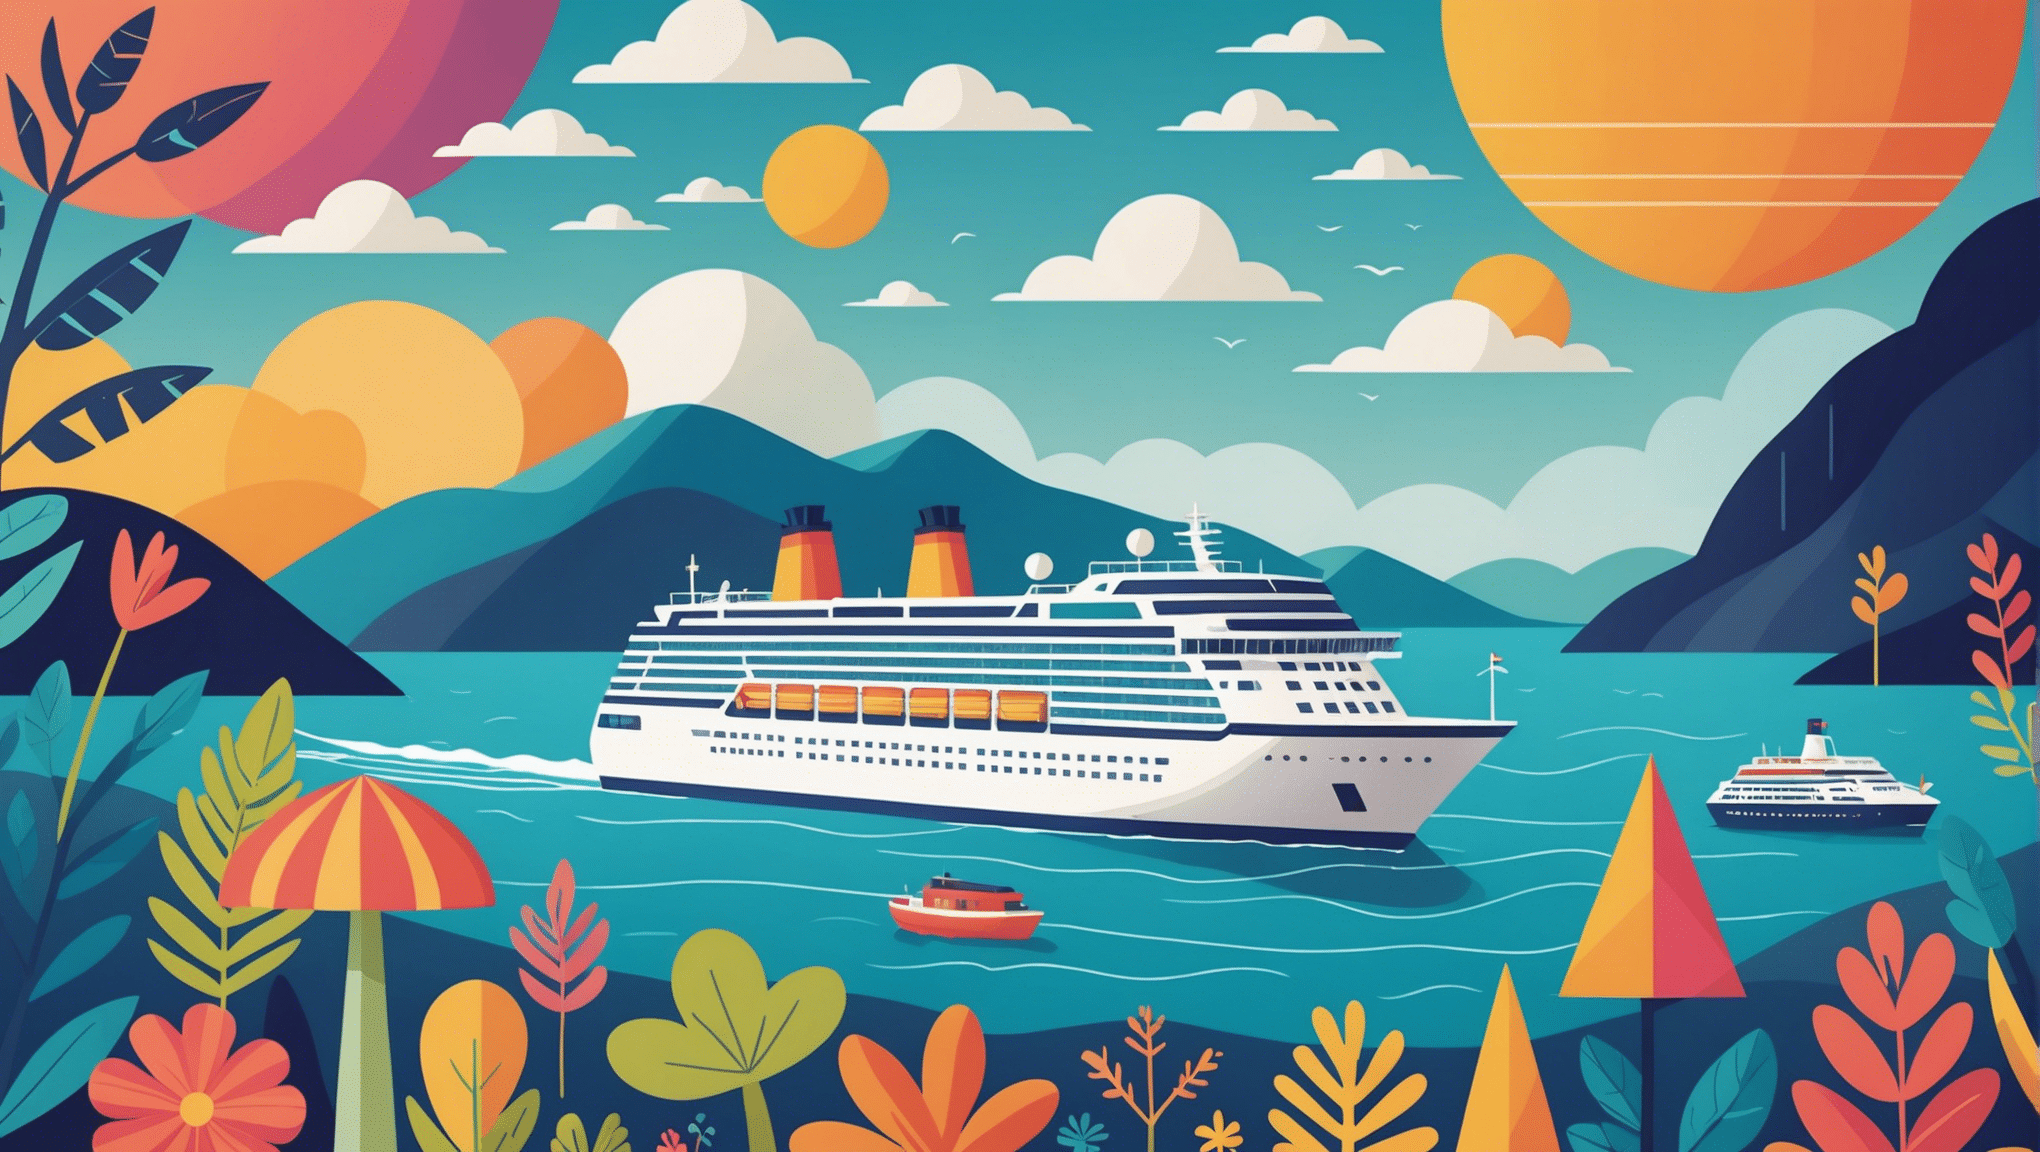 discover the most fascinating itineraries on dream cruises. embark on an unforgettable adventure through the most exotic destinations in the world.